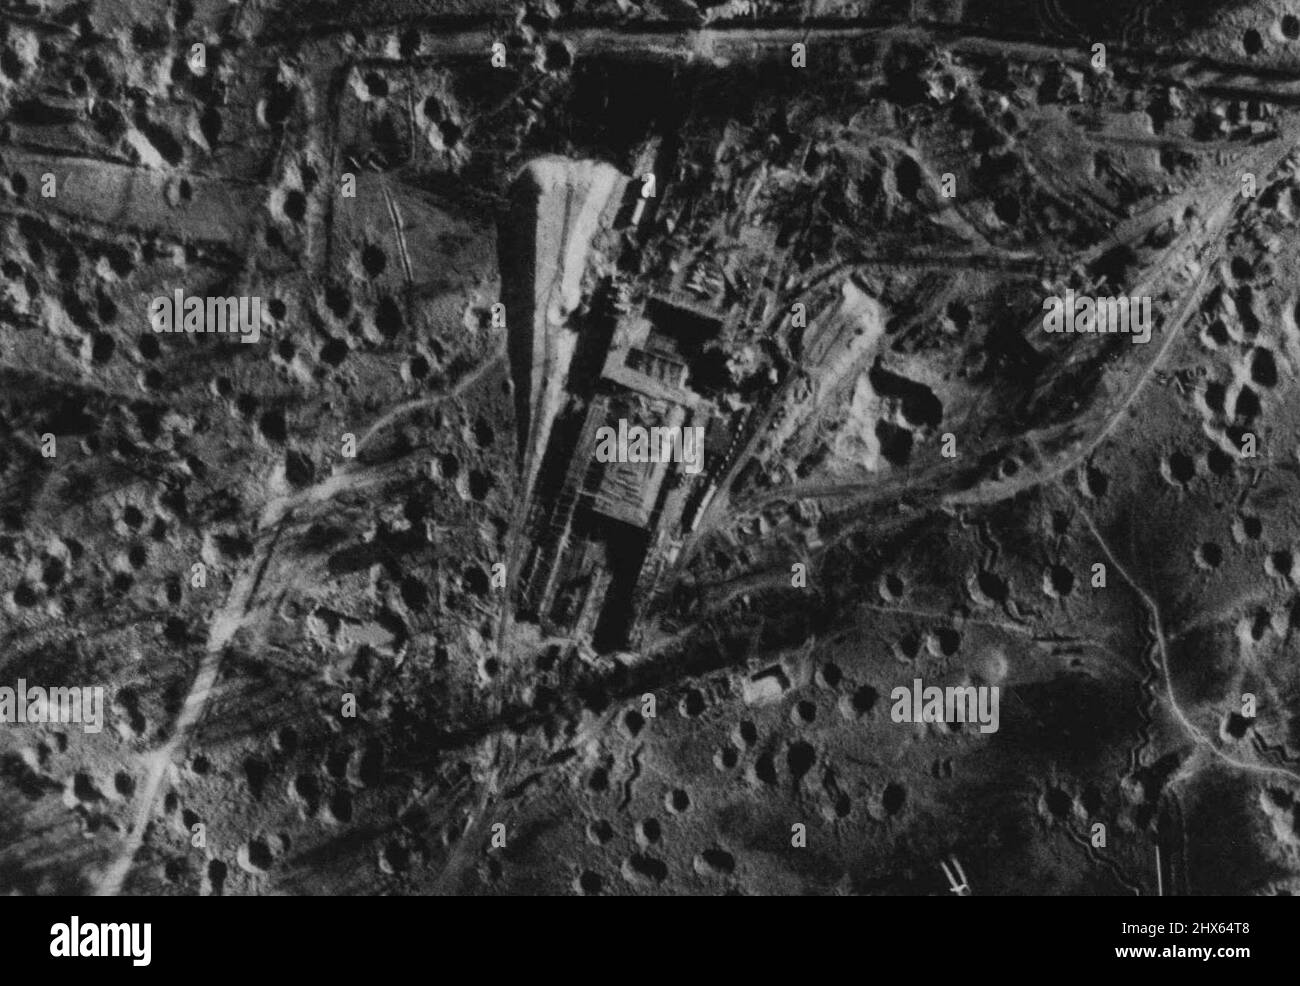 Liberation of Europe. Allied Bombers Attack Pas De Calais Target This picture is one of a series showing the results of Allied air-attacks on a large constructional works in the Pas De Calais area similar to the large site recently captured in the Cherbourg Peninsular. The target consisted of a large concrete structure and a number of ancillary buildings probably associated with it. These and other similar sites have been attacked form time to time by aircraft of R.A.F. Bomber Command and U.S. Stock Photo